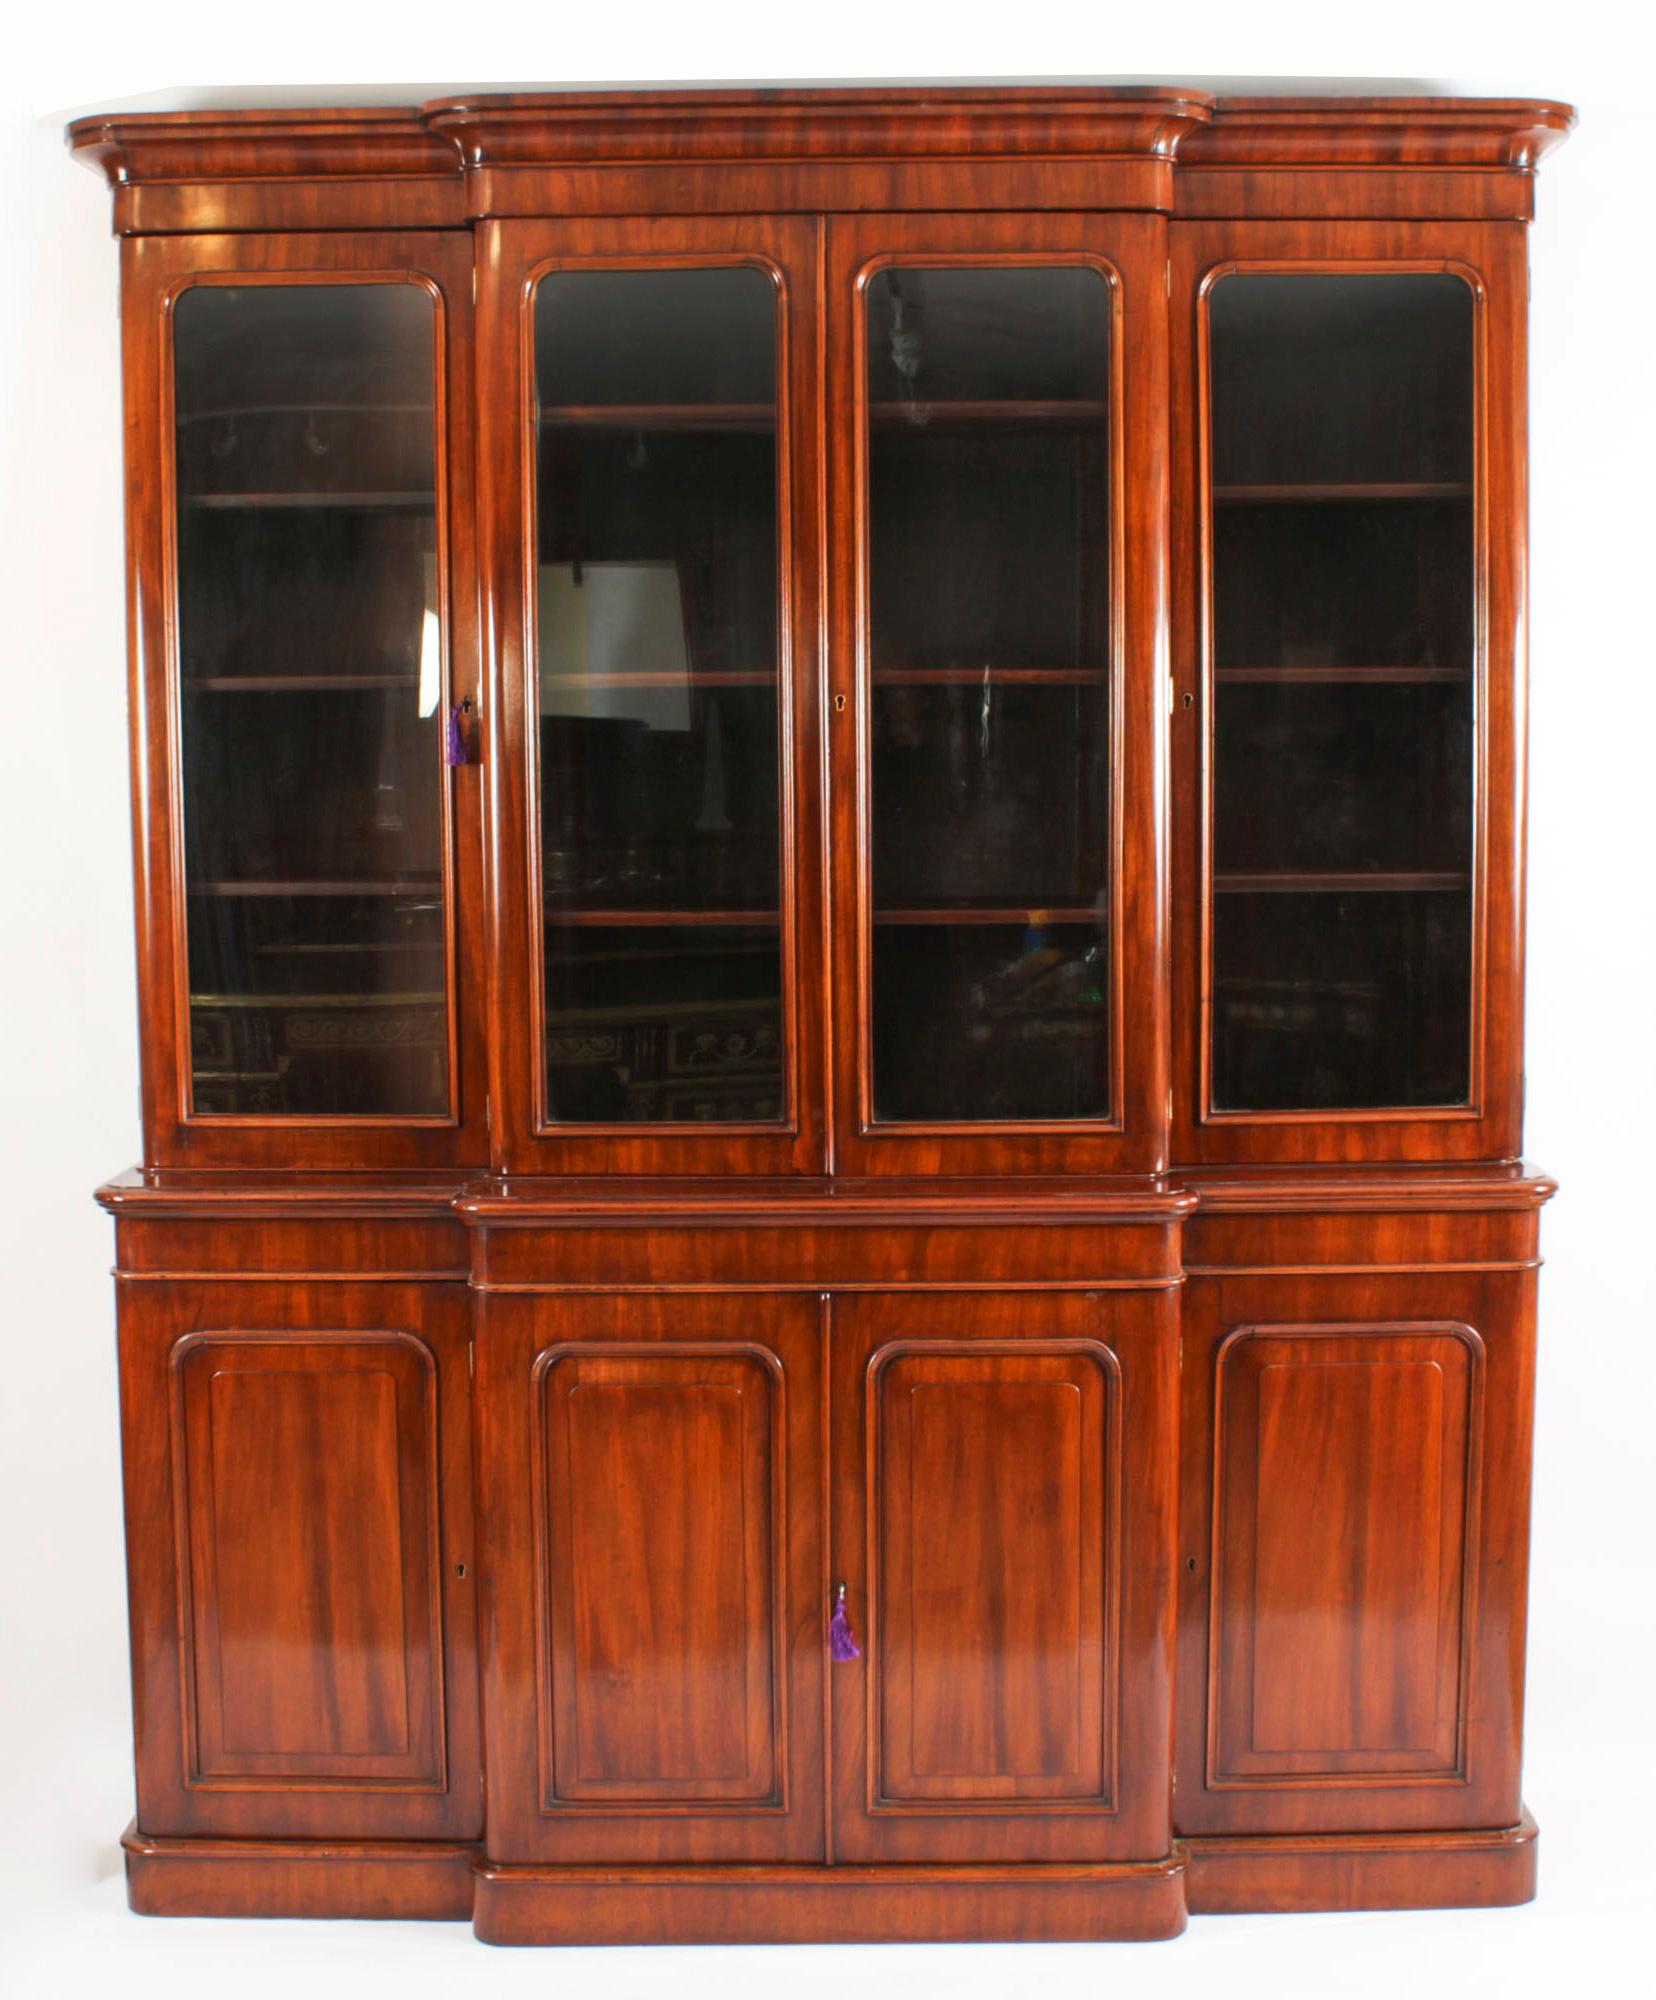 This is a beautiful antique Victorian breakfront bookcase, masterfully crafted in rich figured walnut,  circa 1860 in date.

This grand bookcase features rounded corners and  an upper section with a flared cornice over four glazed doors opening to